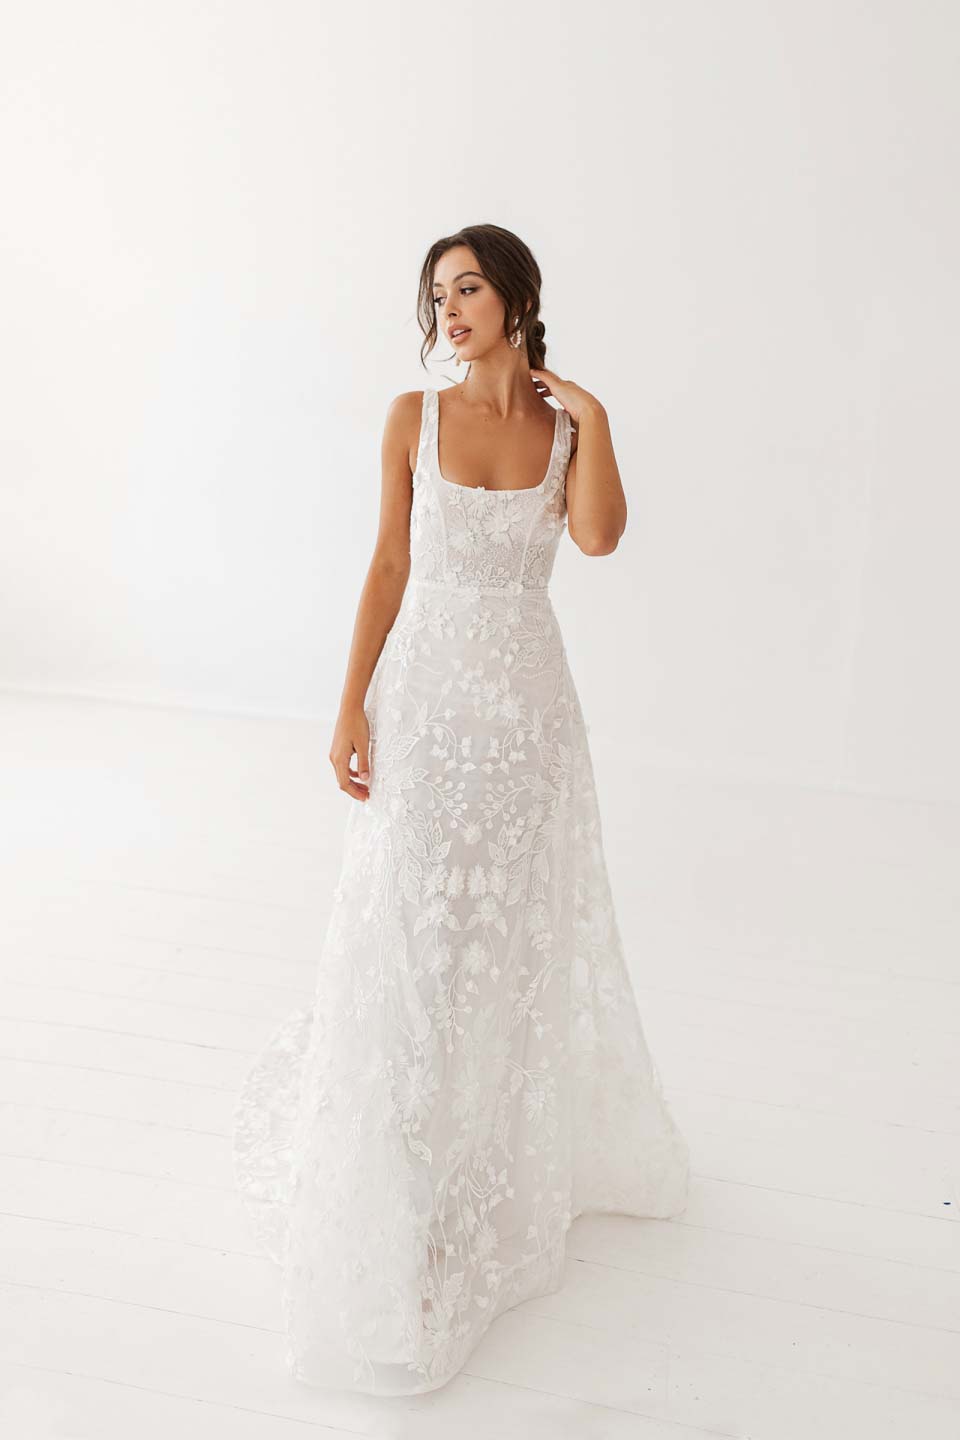 Cherie by Oui Trunk Show Square Neck Lace Wedding Gown